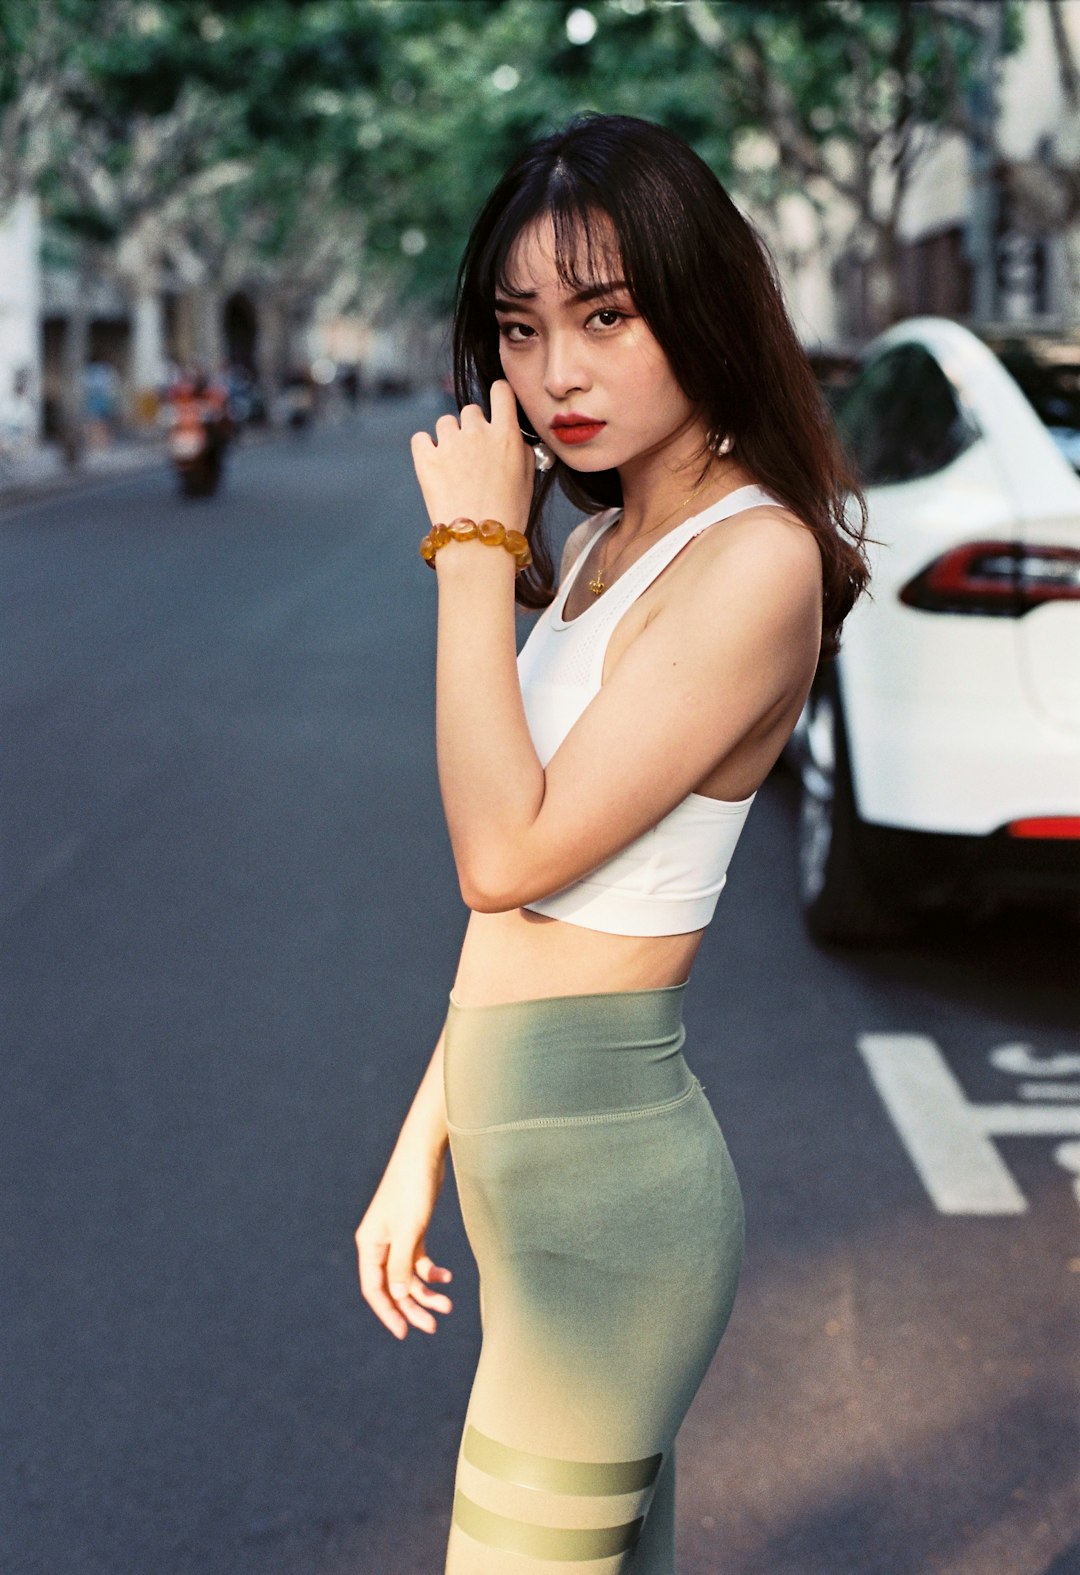 woman in white tank top and gray leggings standing on road during daytime